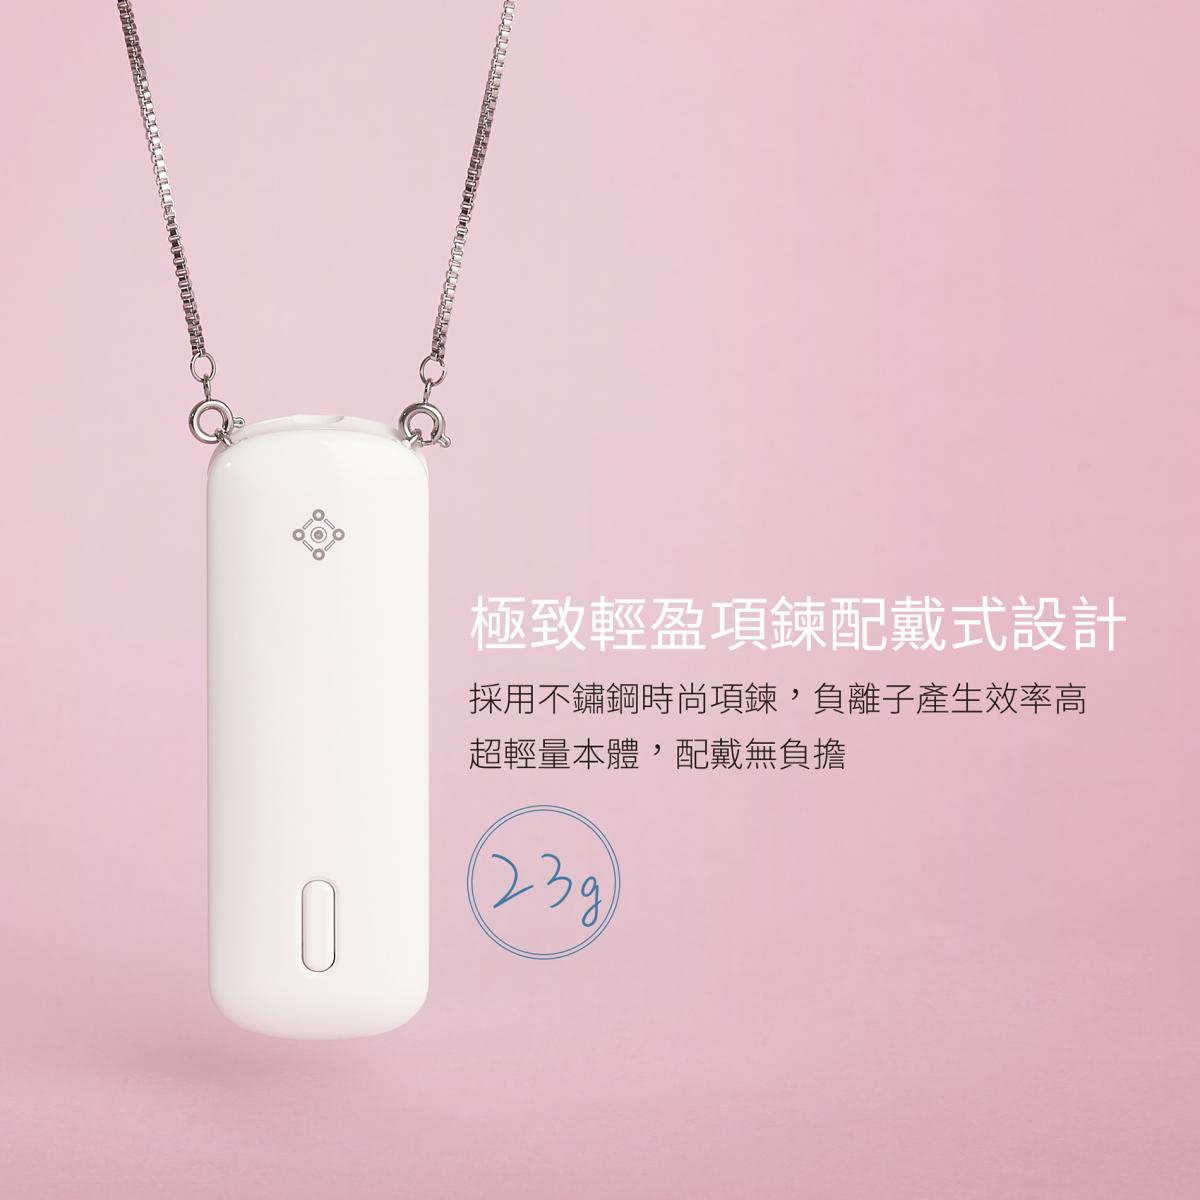 Xunxiang Technology - iAnion-100 Portable Necklace Negative Ion Air Purifier - Blue [Made in Taiwan. Hong Kong licensed goods]